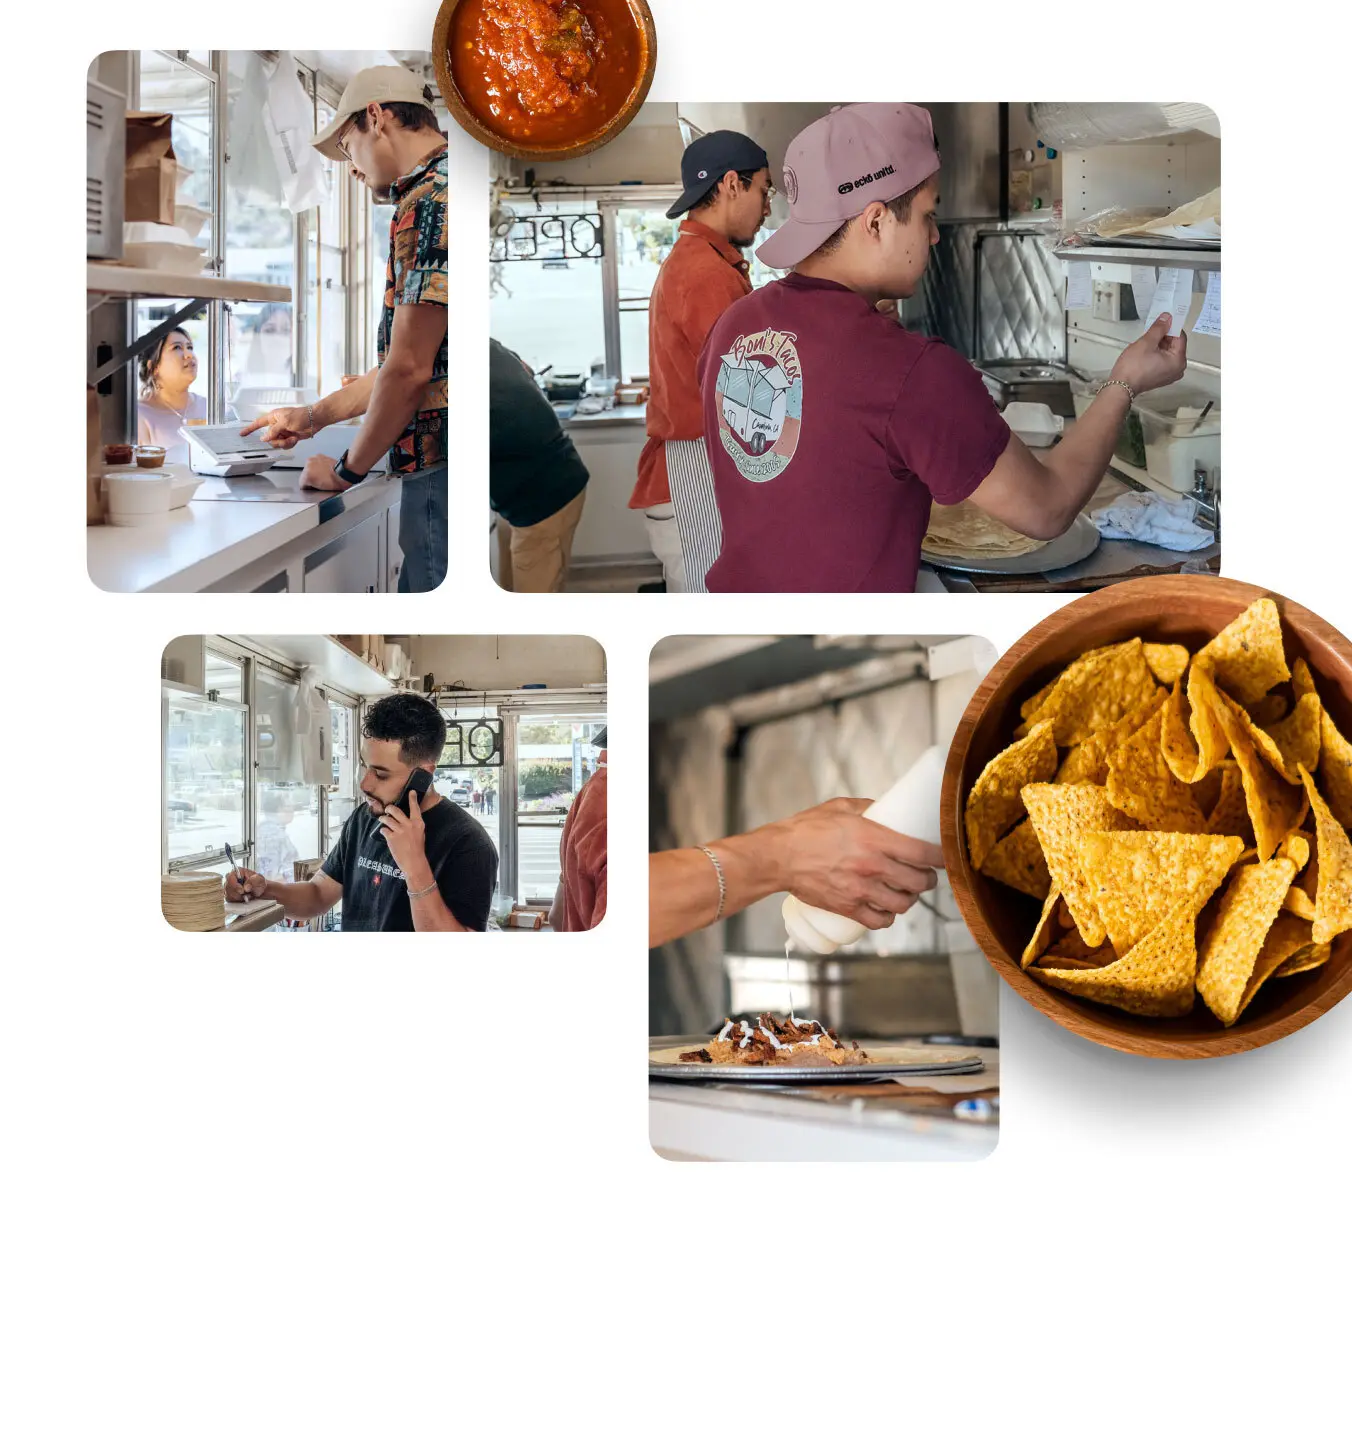 Collection of images from a taco truck, including the merchant taking a payment on a Clover Mini, workers preparing orders in the truck, and a worker taking an order over the phone.